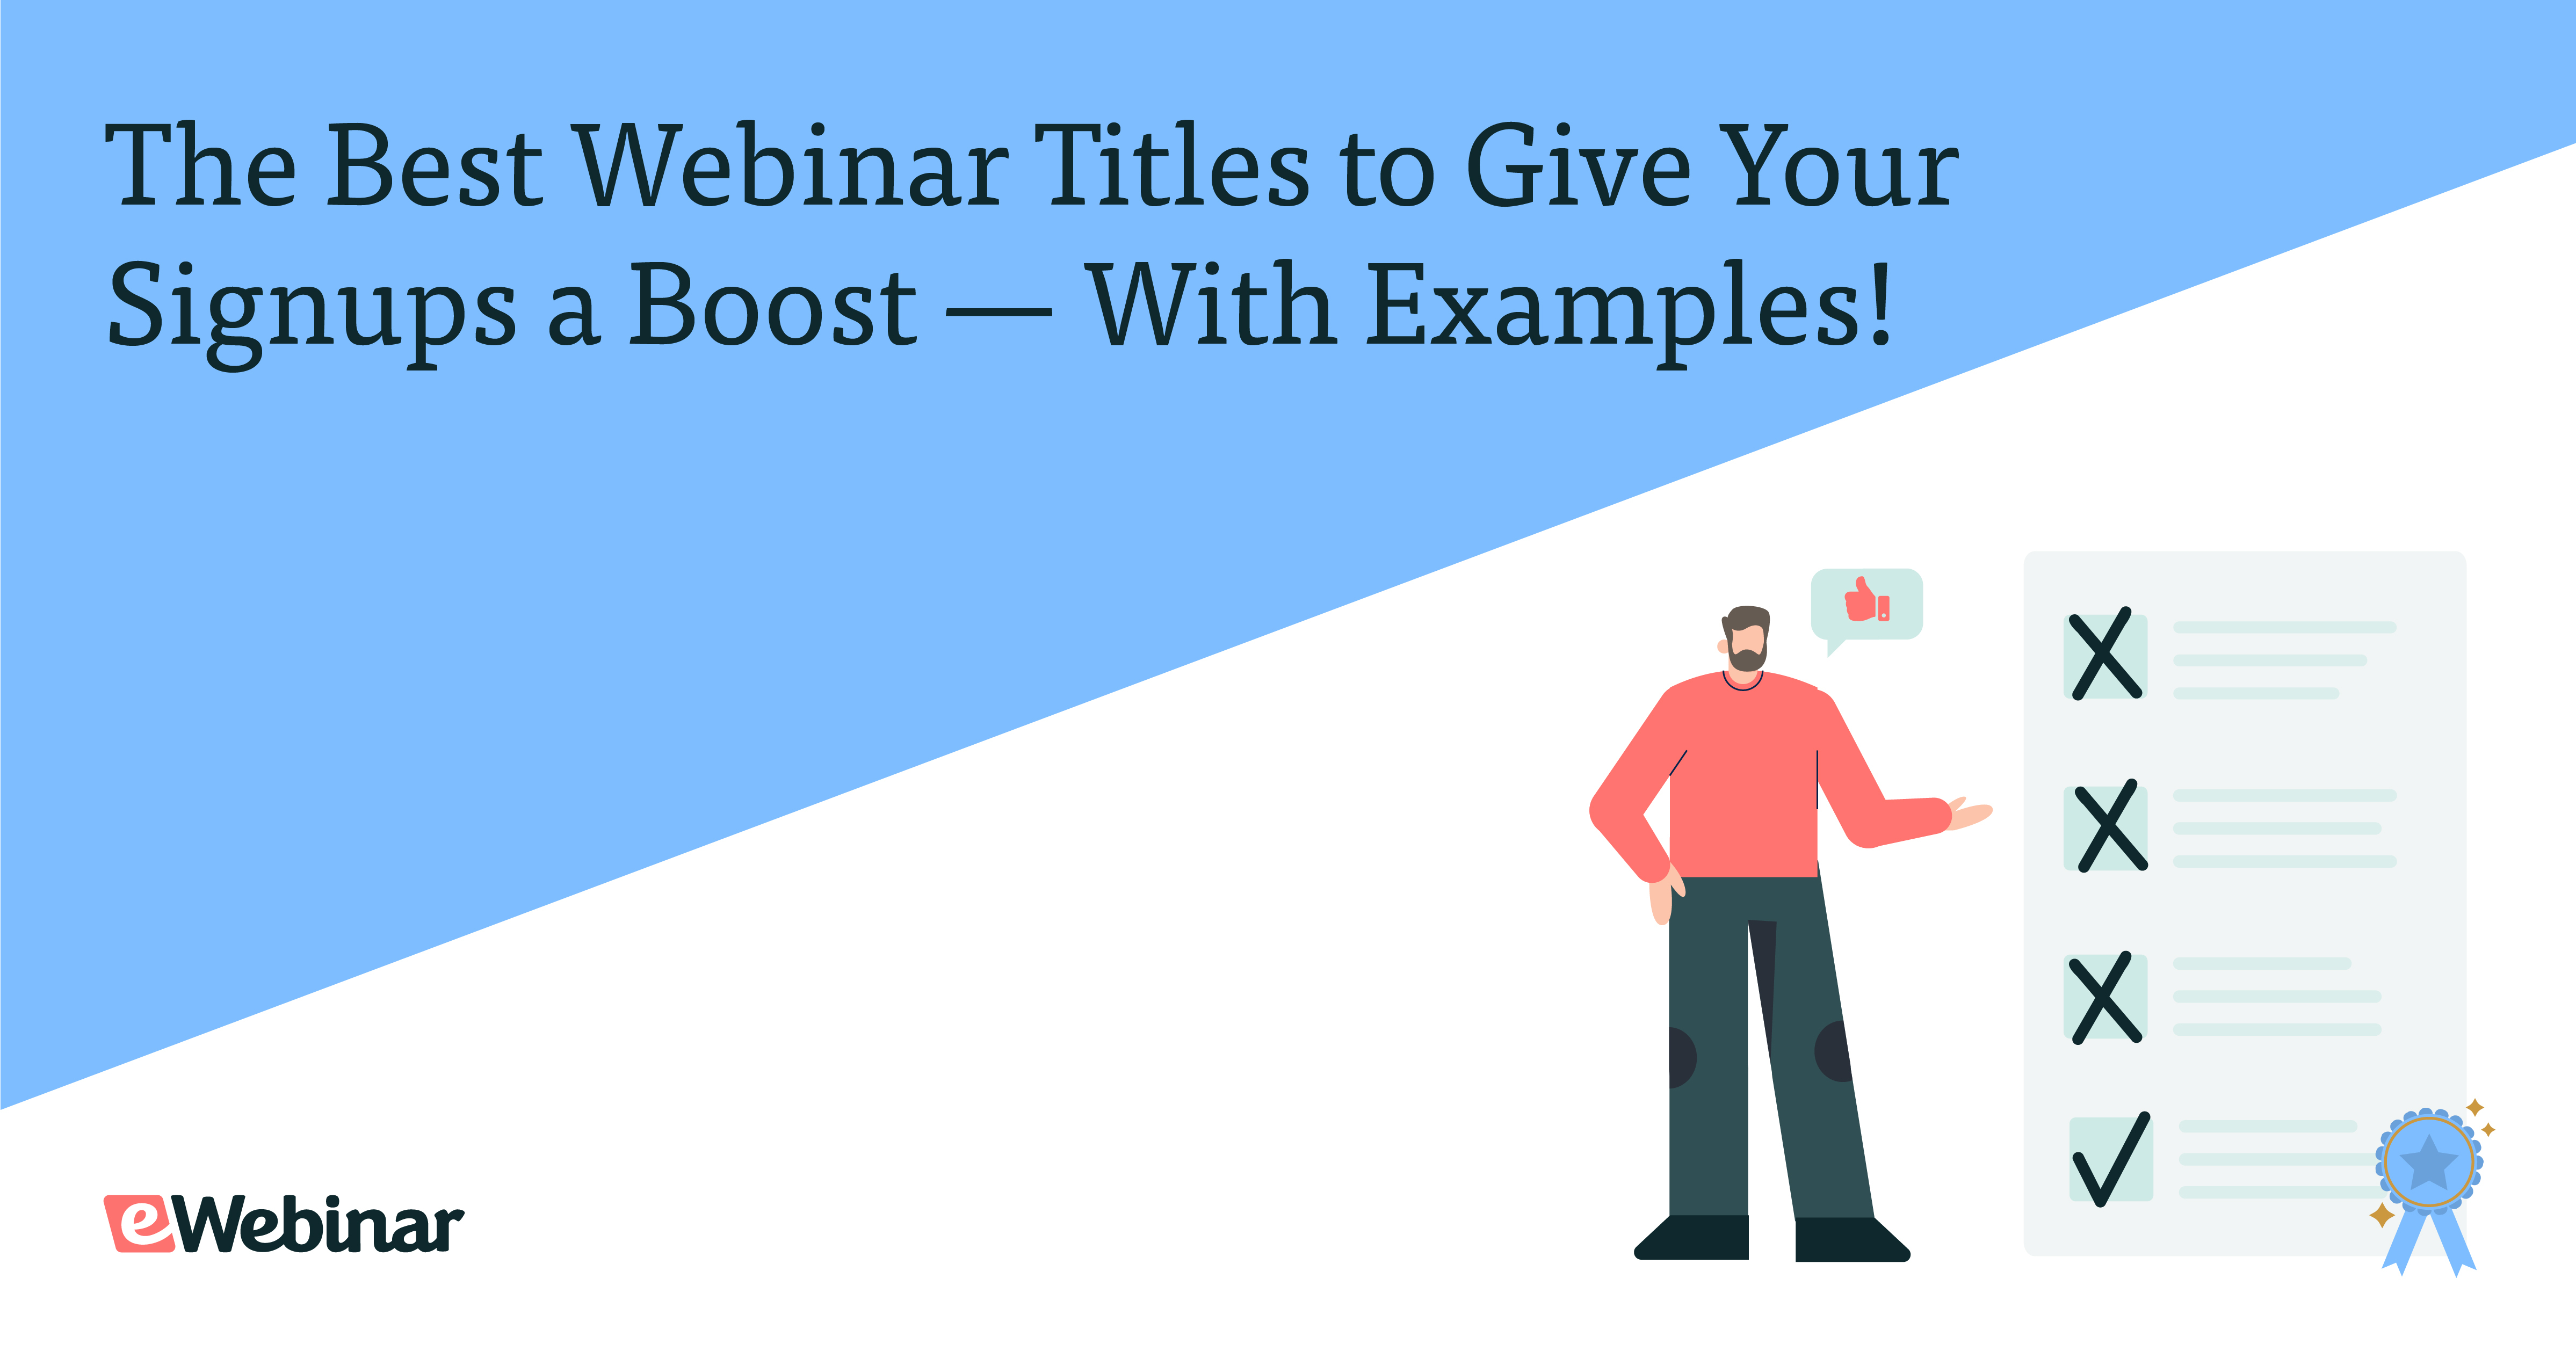 The Best Webinar Titles to Give Your Signups a Boost with Examples